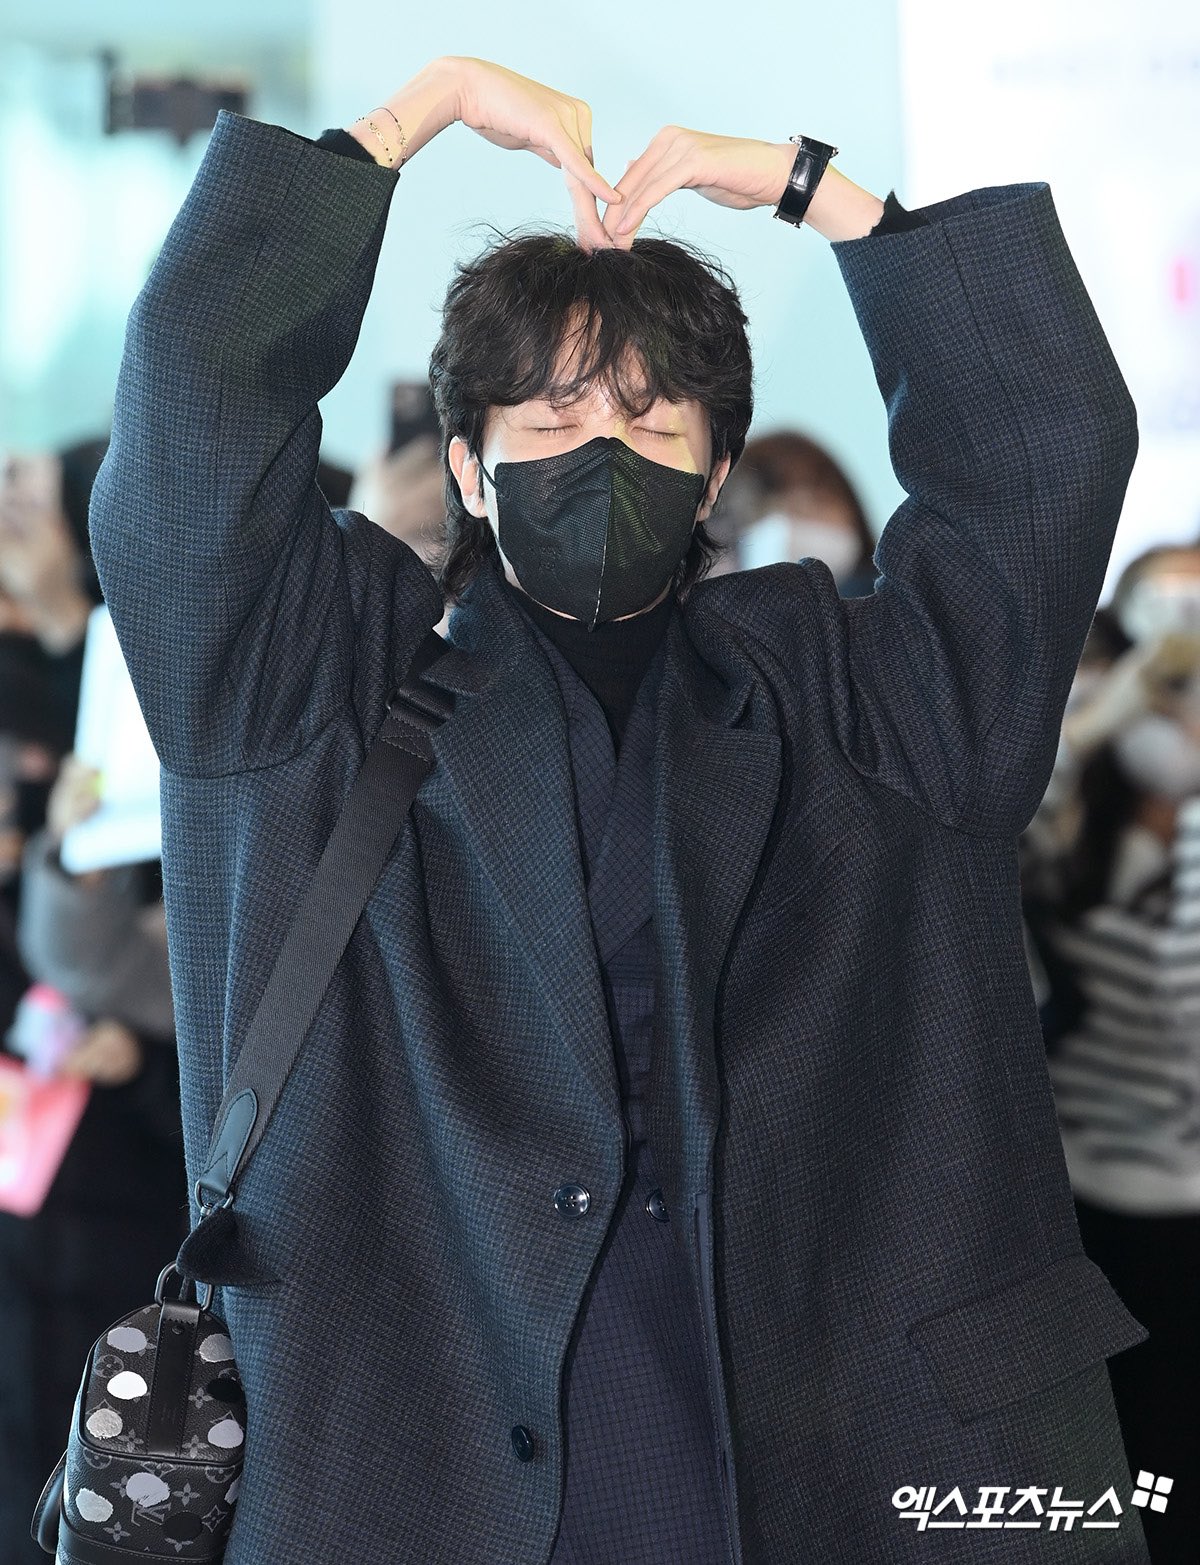 hourly j-hope (slow) on X: j-hope leaving for Paris to attend the